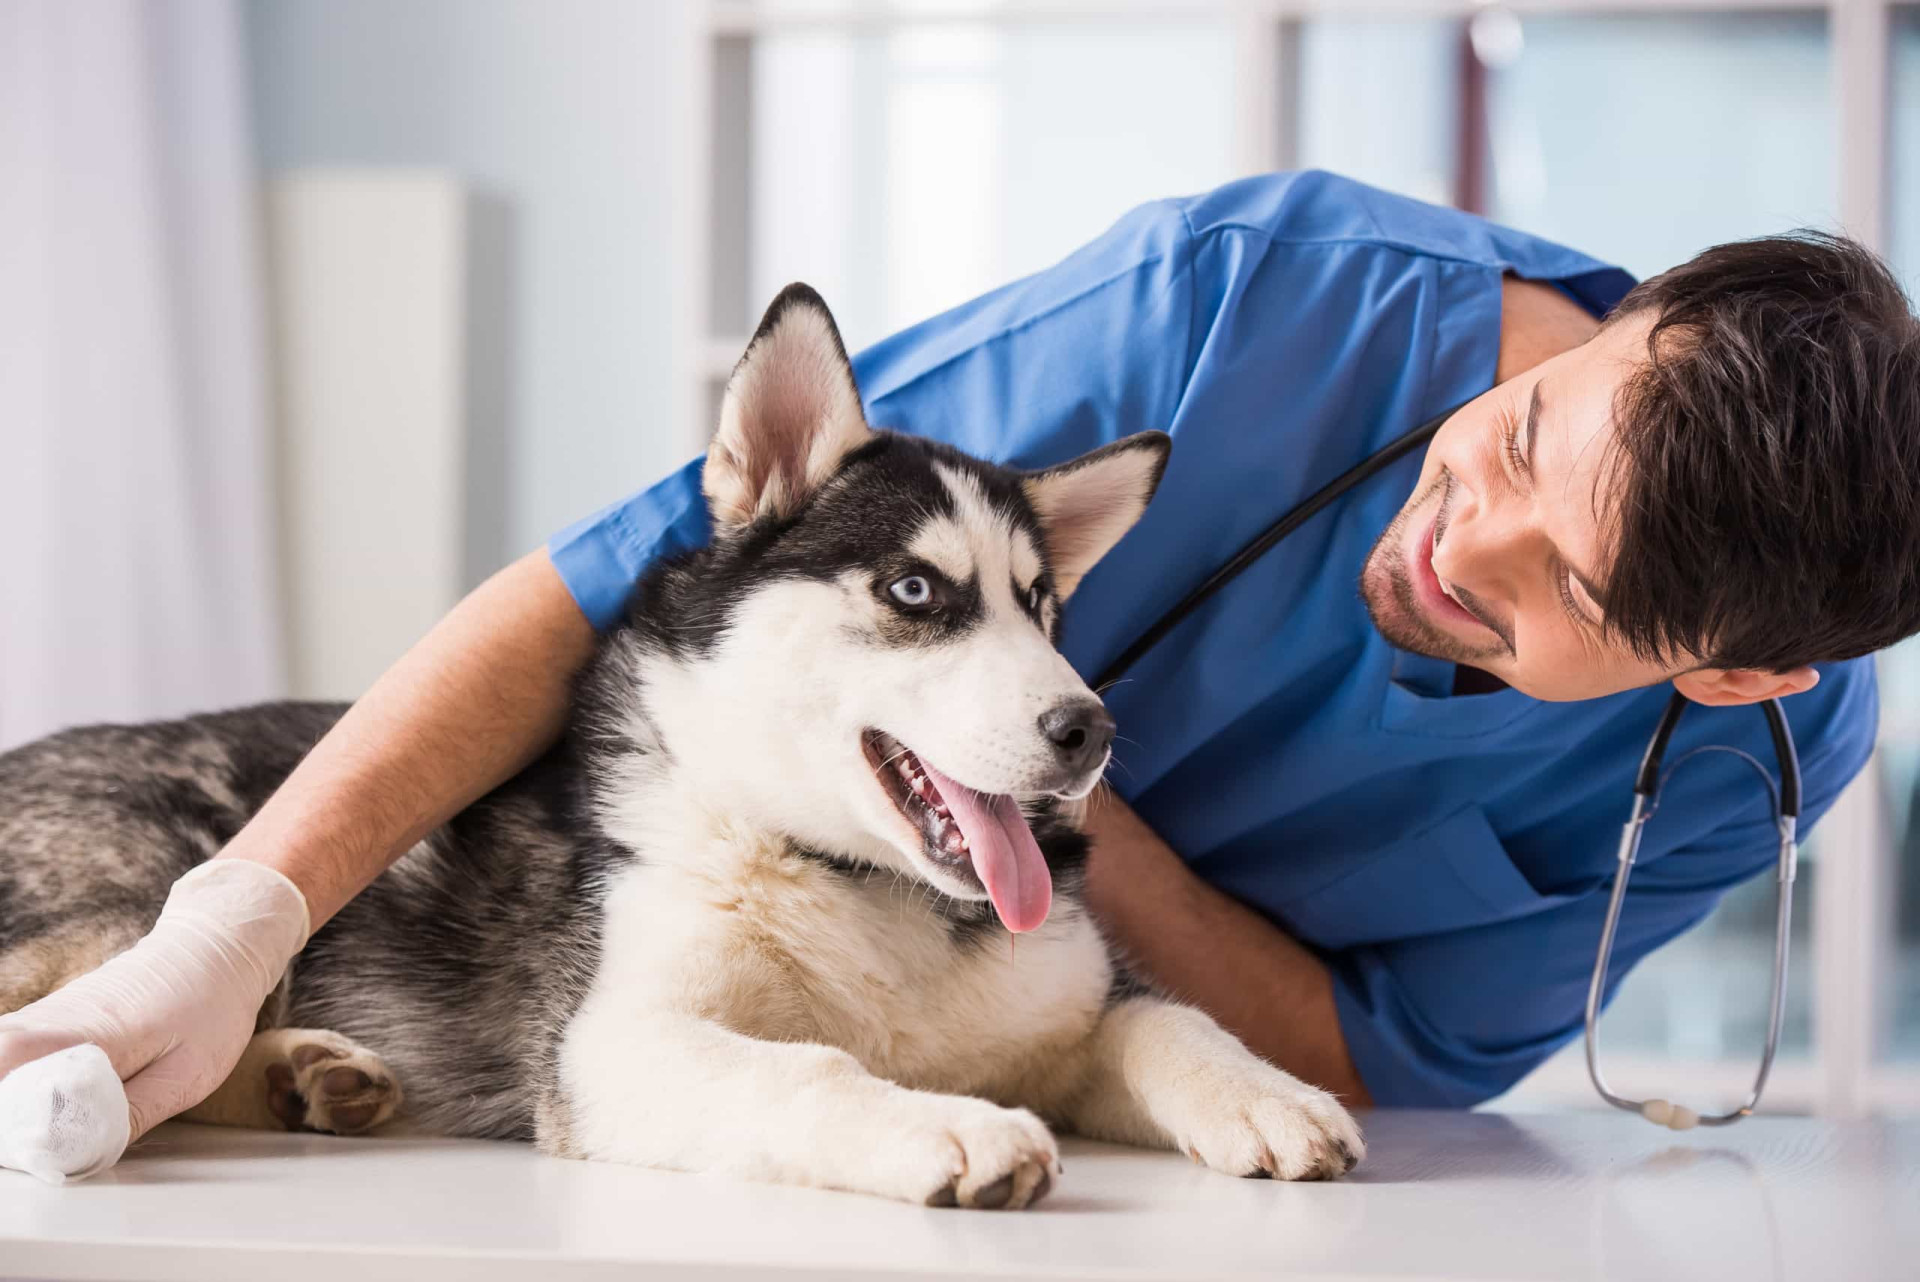 <p>Take your dog for a checkup before you go on a big trip. It’s essential that your animal is fit to travel.</p><p><a href="https://www.msn.com/en-us/community/channel/vid-7xx8mnucu55yw63we9va2gwr7uihbxwc68fxqp25x6tg4ftibpra?cvid=94631541bc0f4f89bfd59158d696ad7e">Follow us and access great exclusive content every day</a></p>